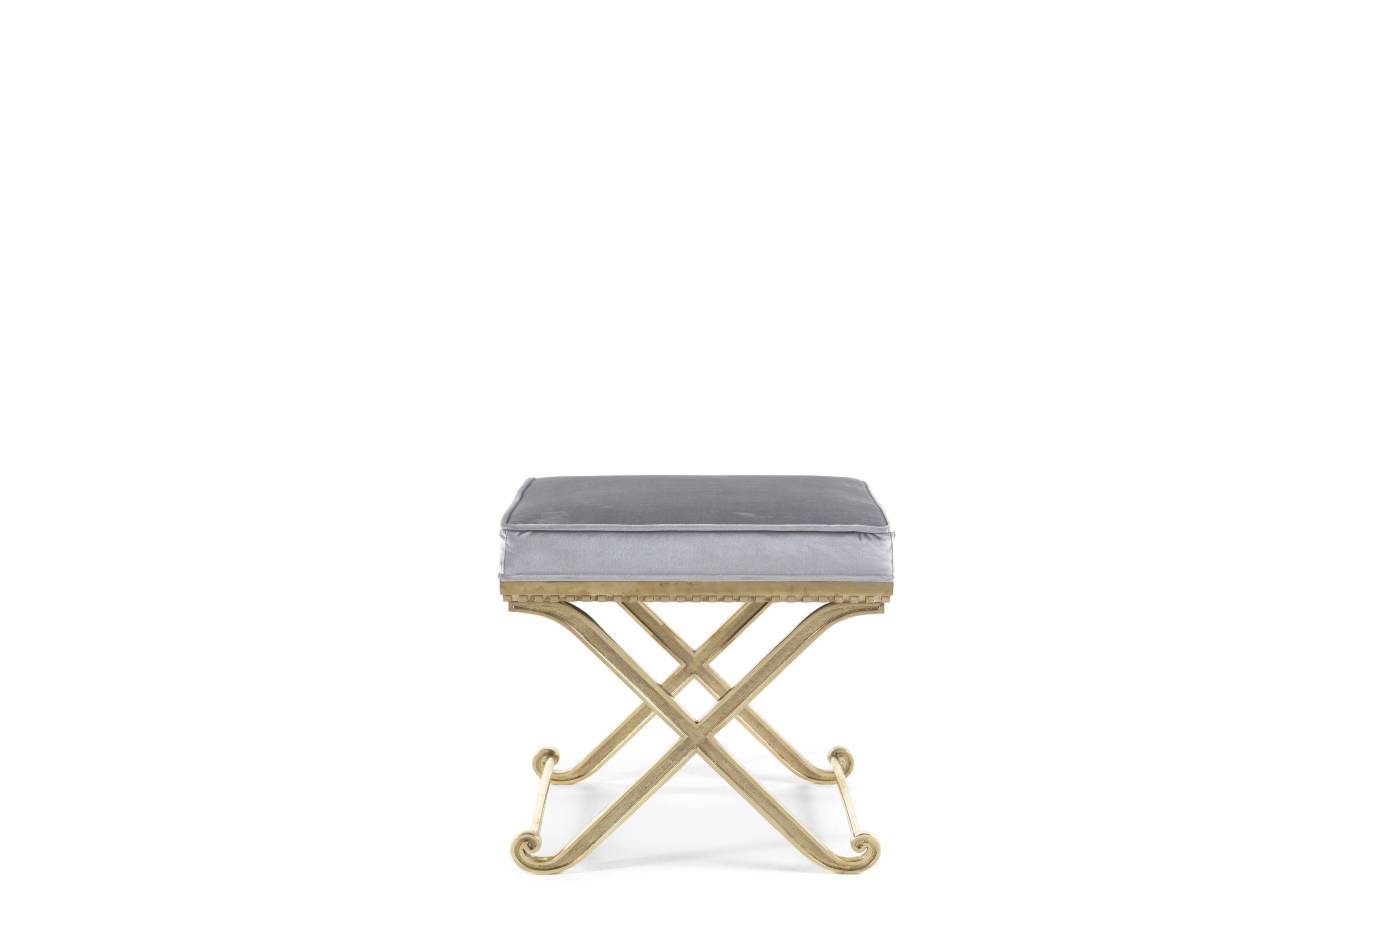 PLEASURE stool - Bespoke projects with luxury Made in Italy classic furniture